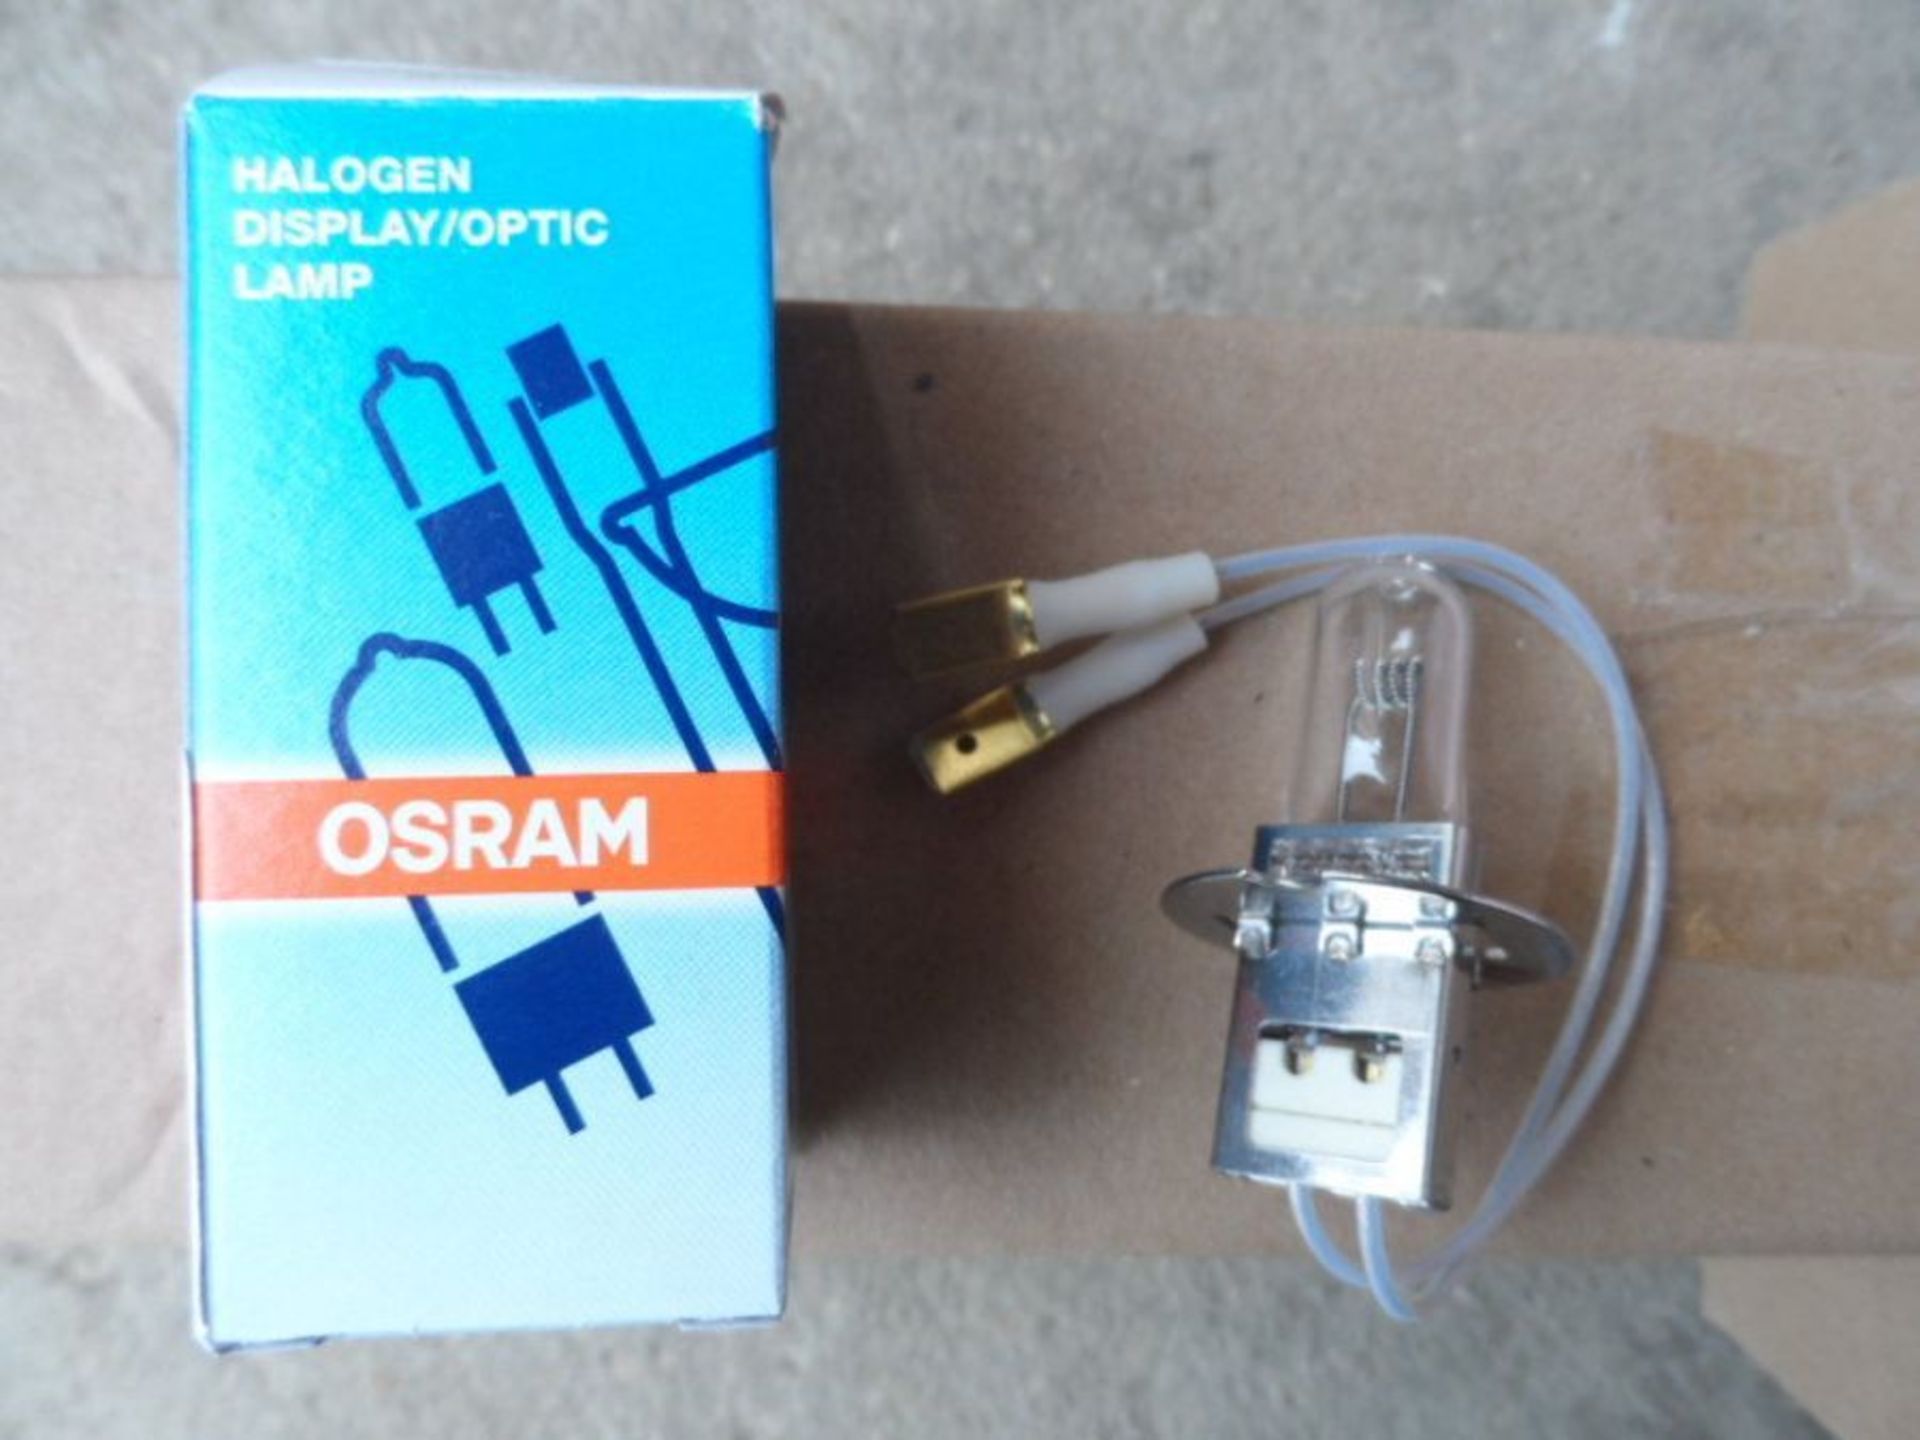 Large Quantity of Osram Halogen Airfield / Runway Lamps - around 960 retail at £20 each - £18k!!